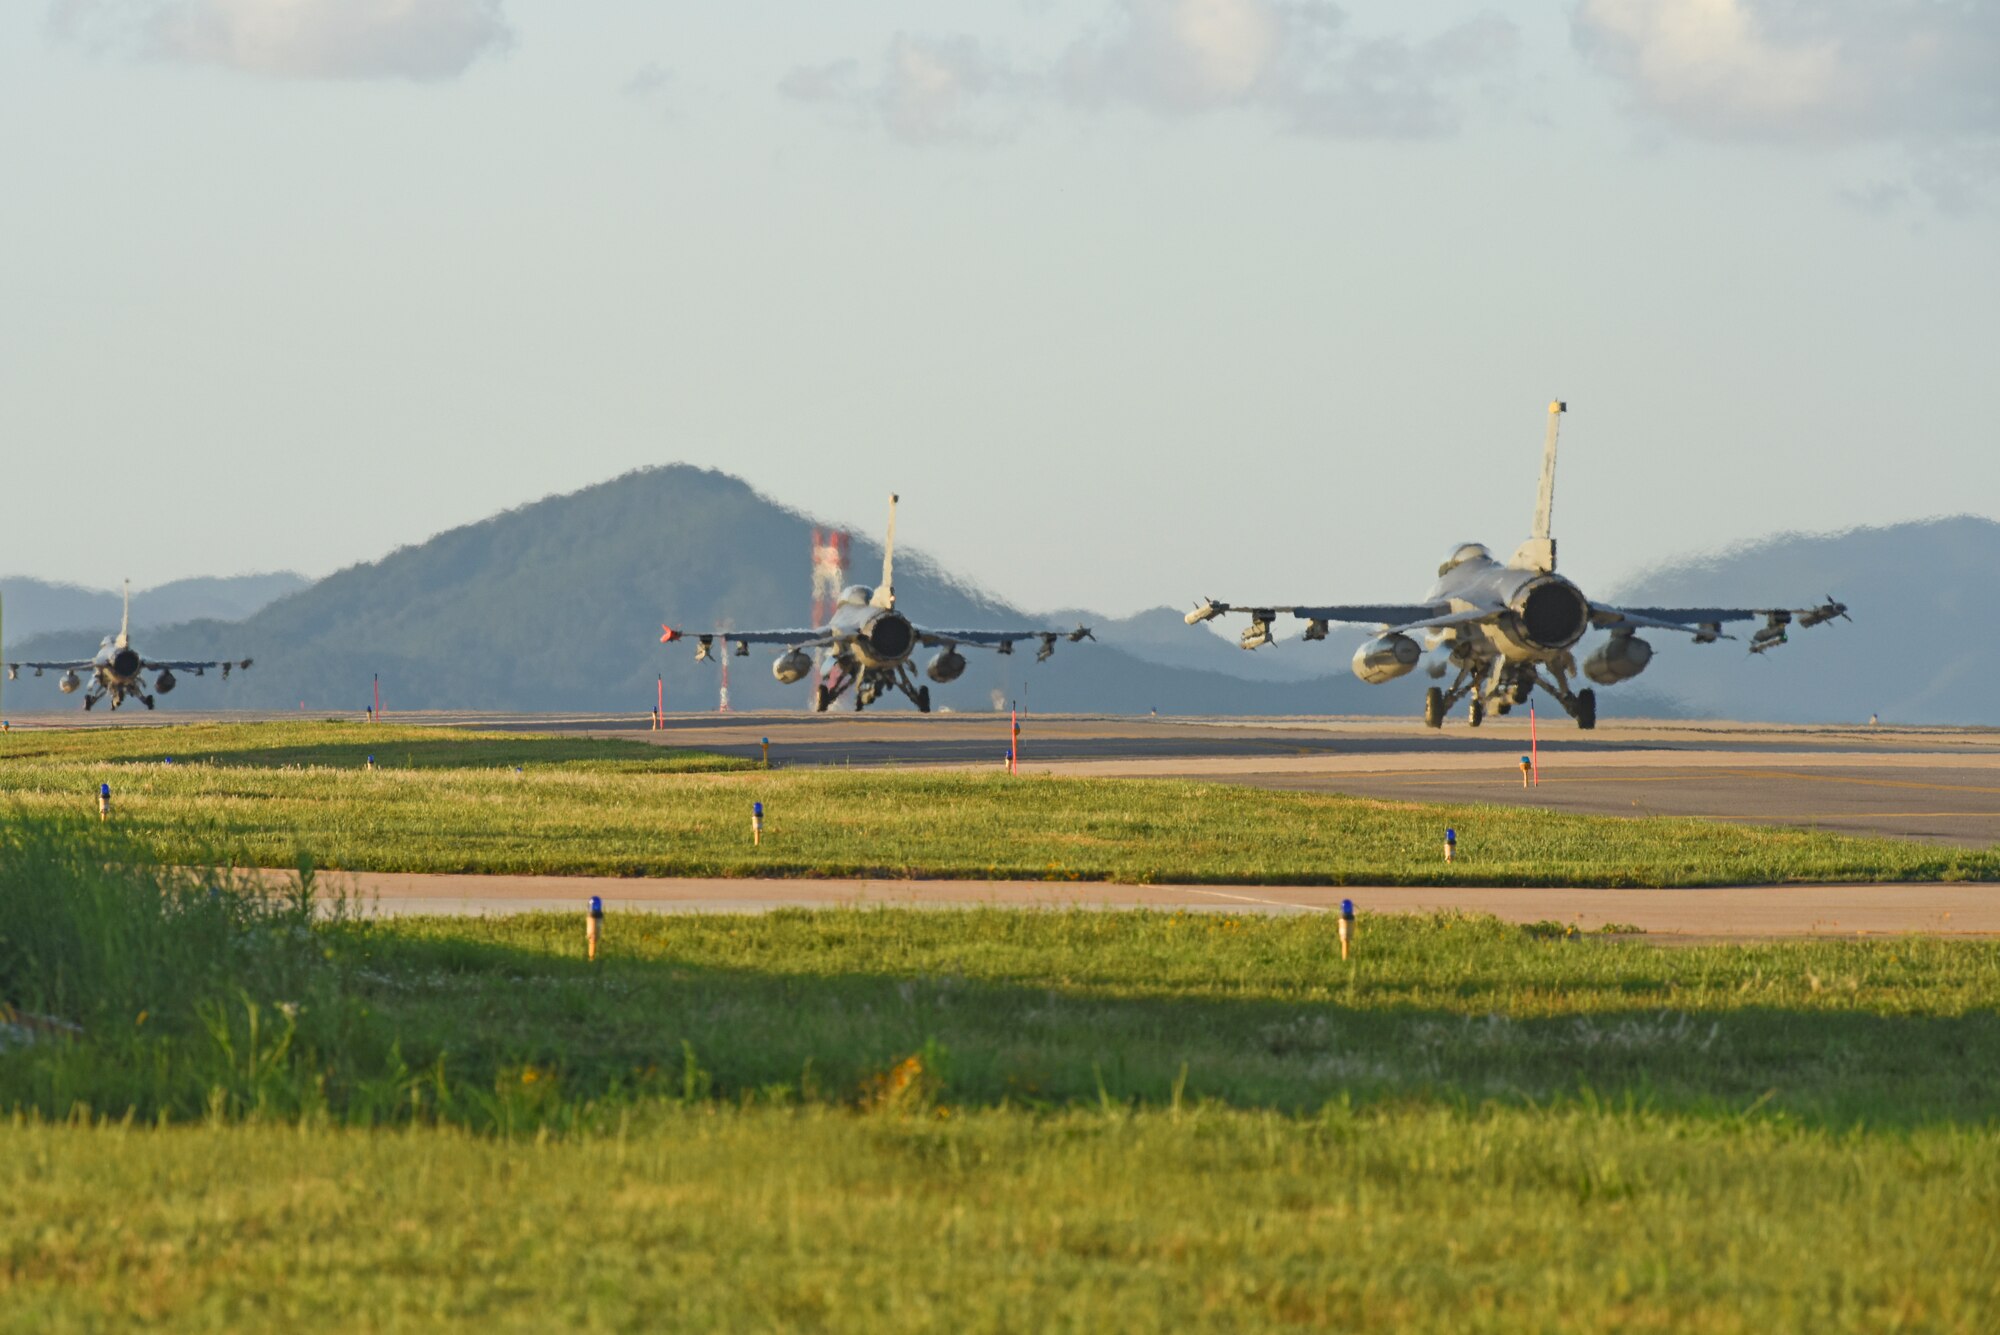 U.S. Air Force F-16 Fighting Falcons assigned to the 8th Fighter Wing taxi down the runway in preparation for a routine training flight at Kunsan Air Base, Republic of Korea, Aug. 30, 2019. The 8th FW is home to two fighter squadrons, the 80th Fighter Squadron “Juvats” and 35th FS “Pantons.” (U.S. Air Force photo by Staff Sgt. Mackenzie Mendez)